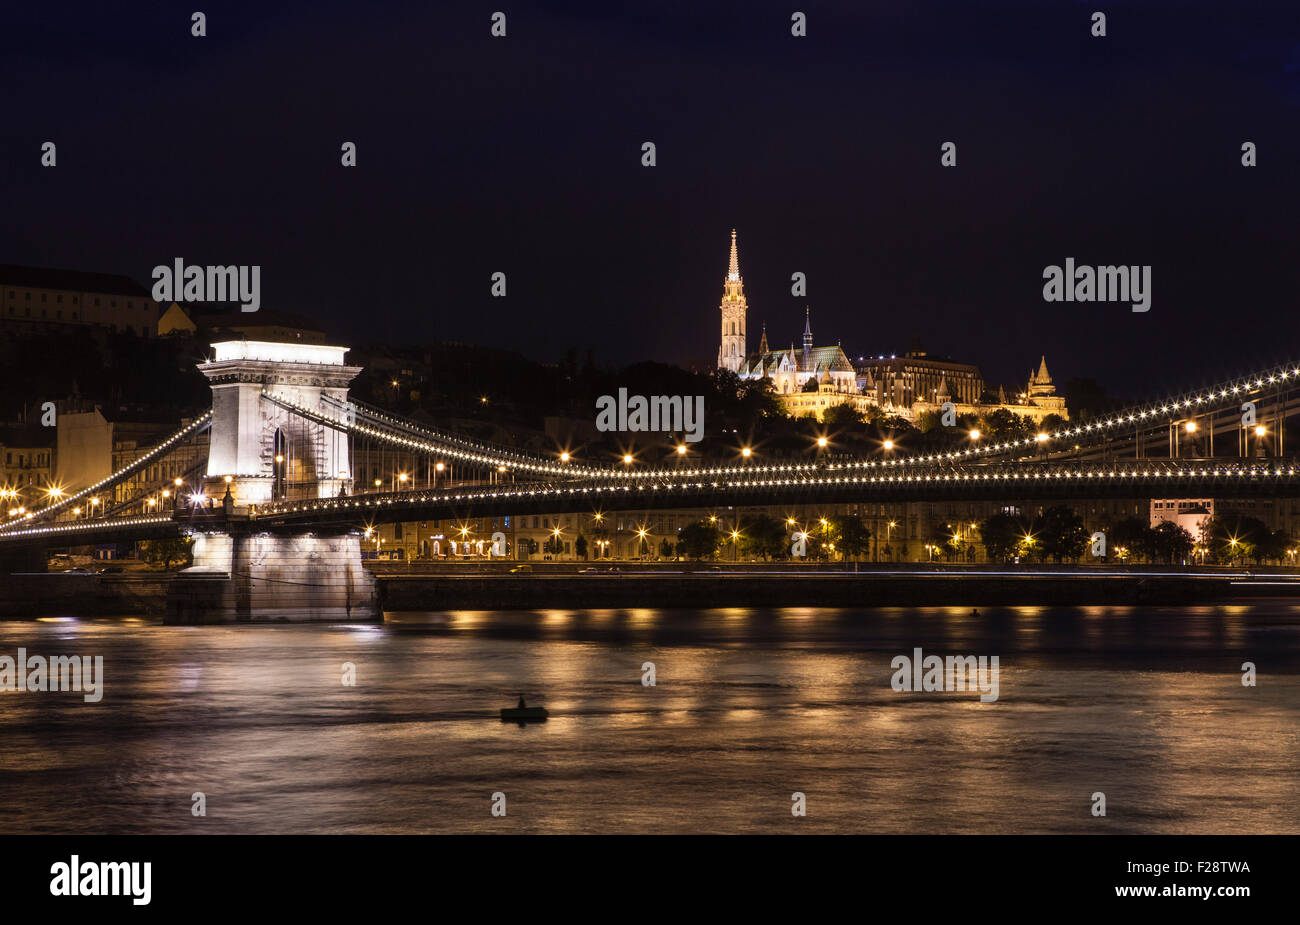 A beautiful night-time view of the Chain Bridge spanning the River Danube with the Fisherman’s Bastion and St. Matthias Church i Stock Photo